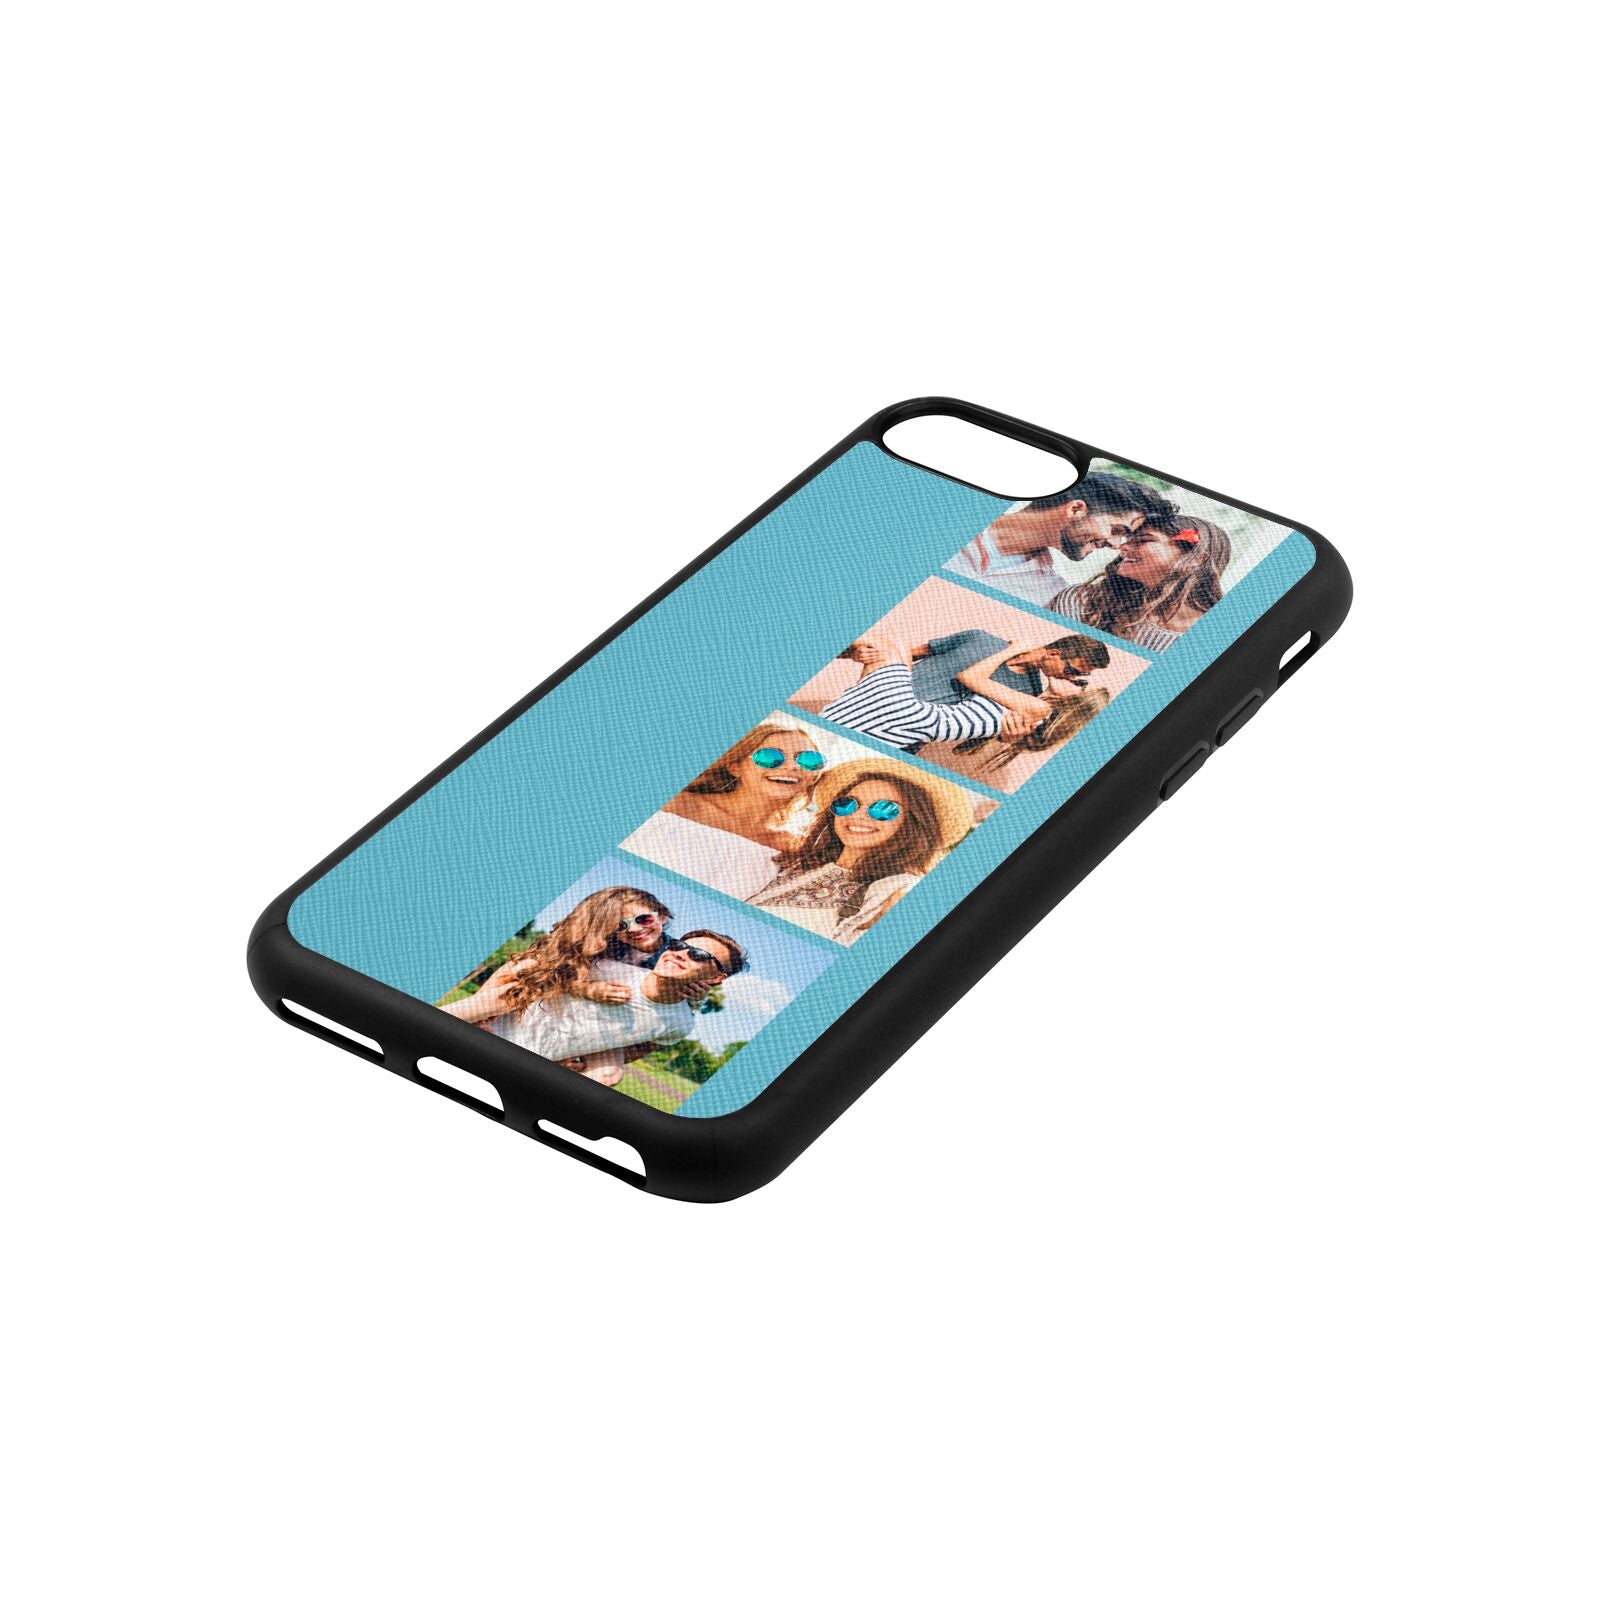 Photo Strip Montage Upload Sky Saffiano Leather iPhone 8 Case Side Angle